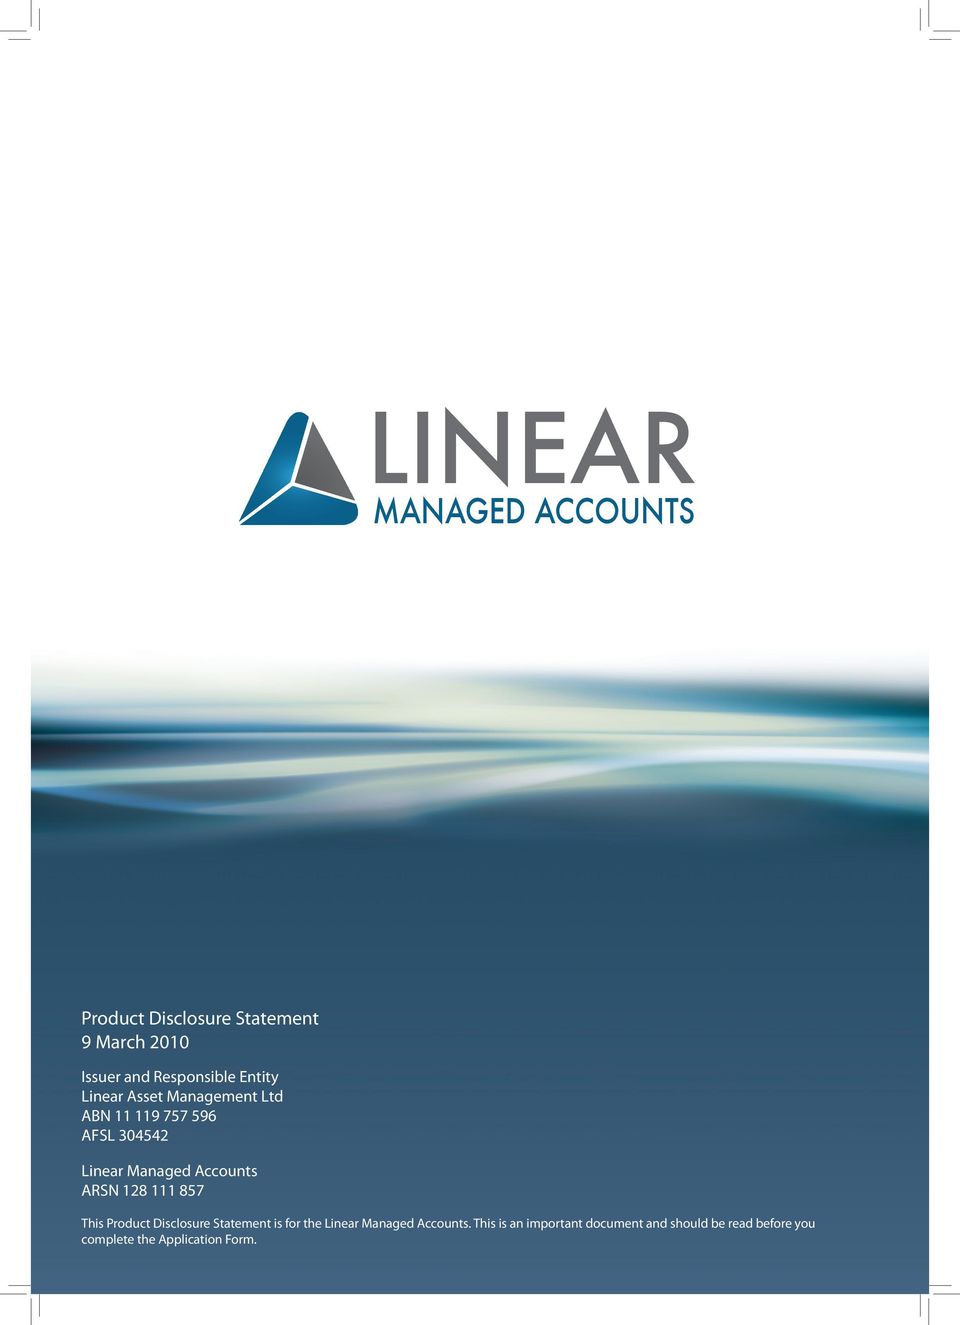 Accounts ARSN 128 111 857 This Product Disclosure Statement is for the Linear Managed